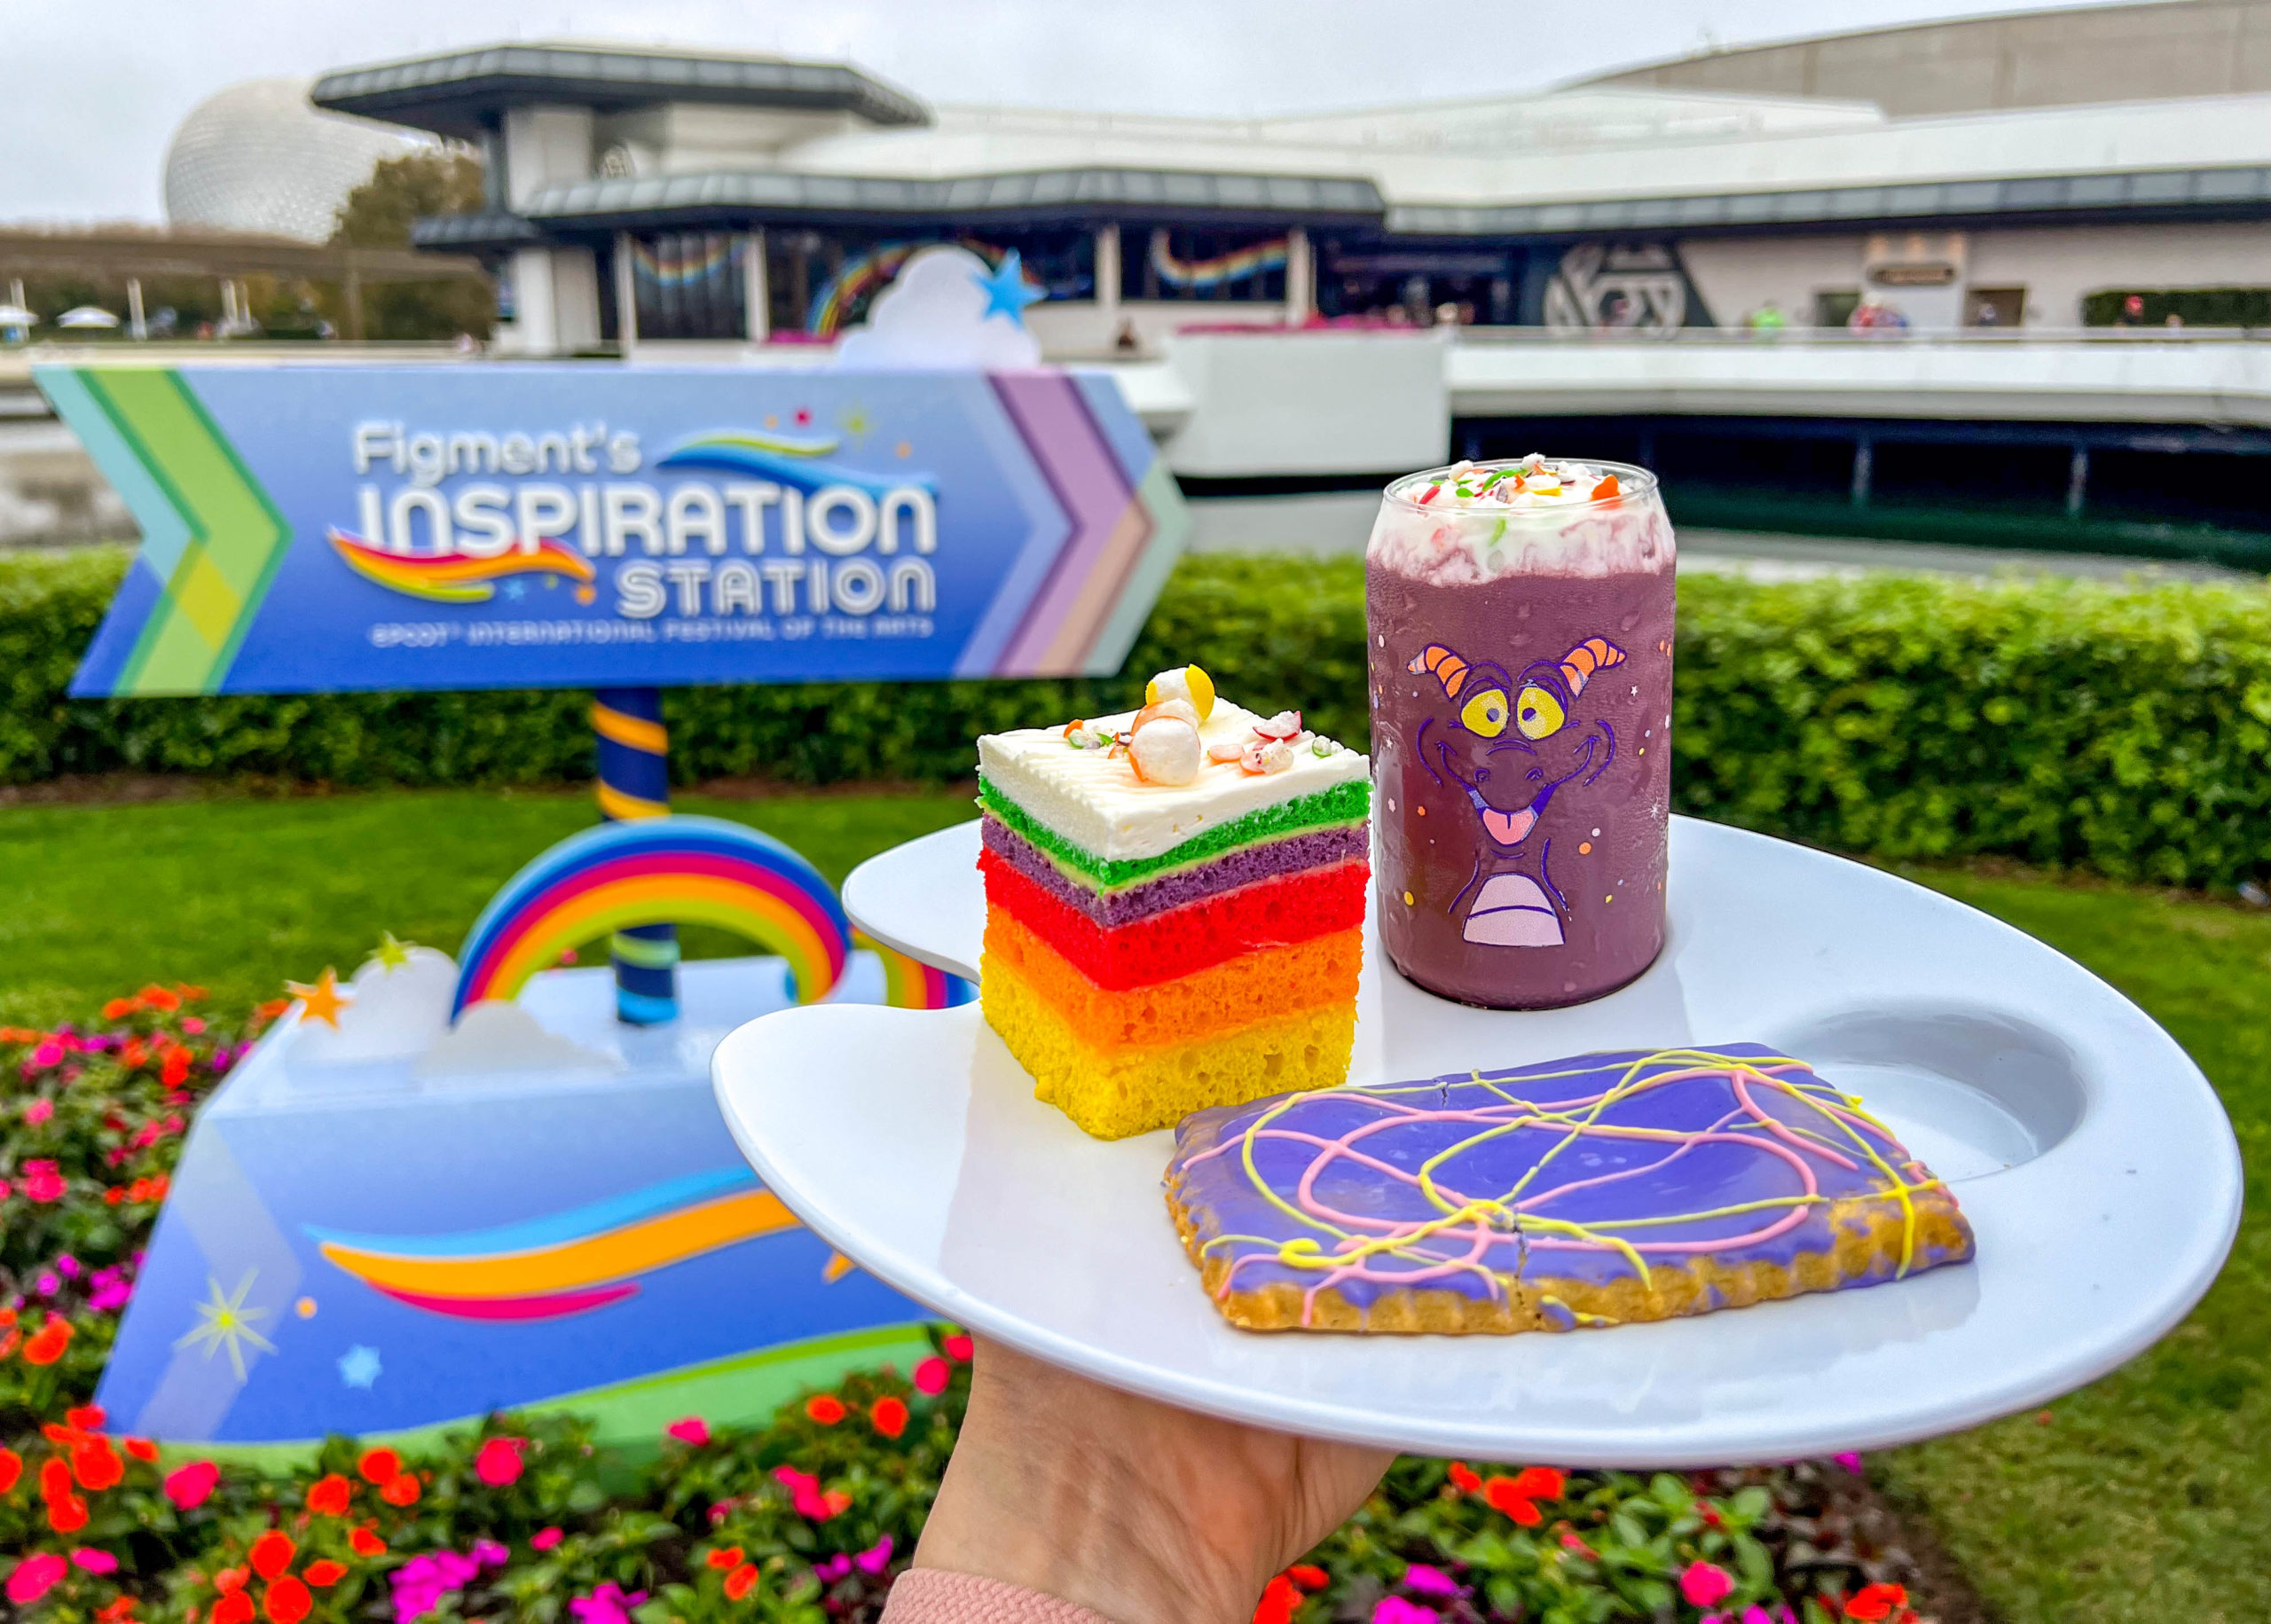 Figment's Inspiration Station spread